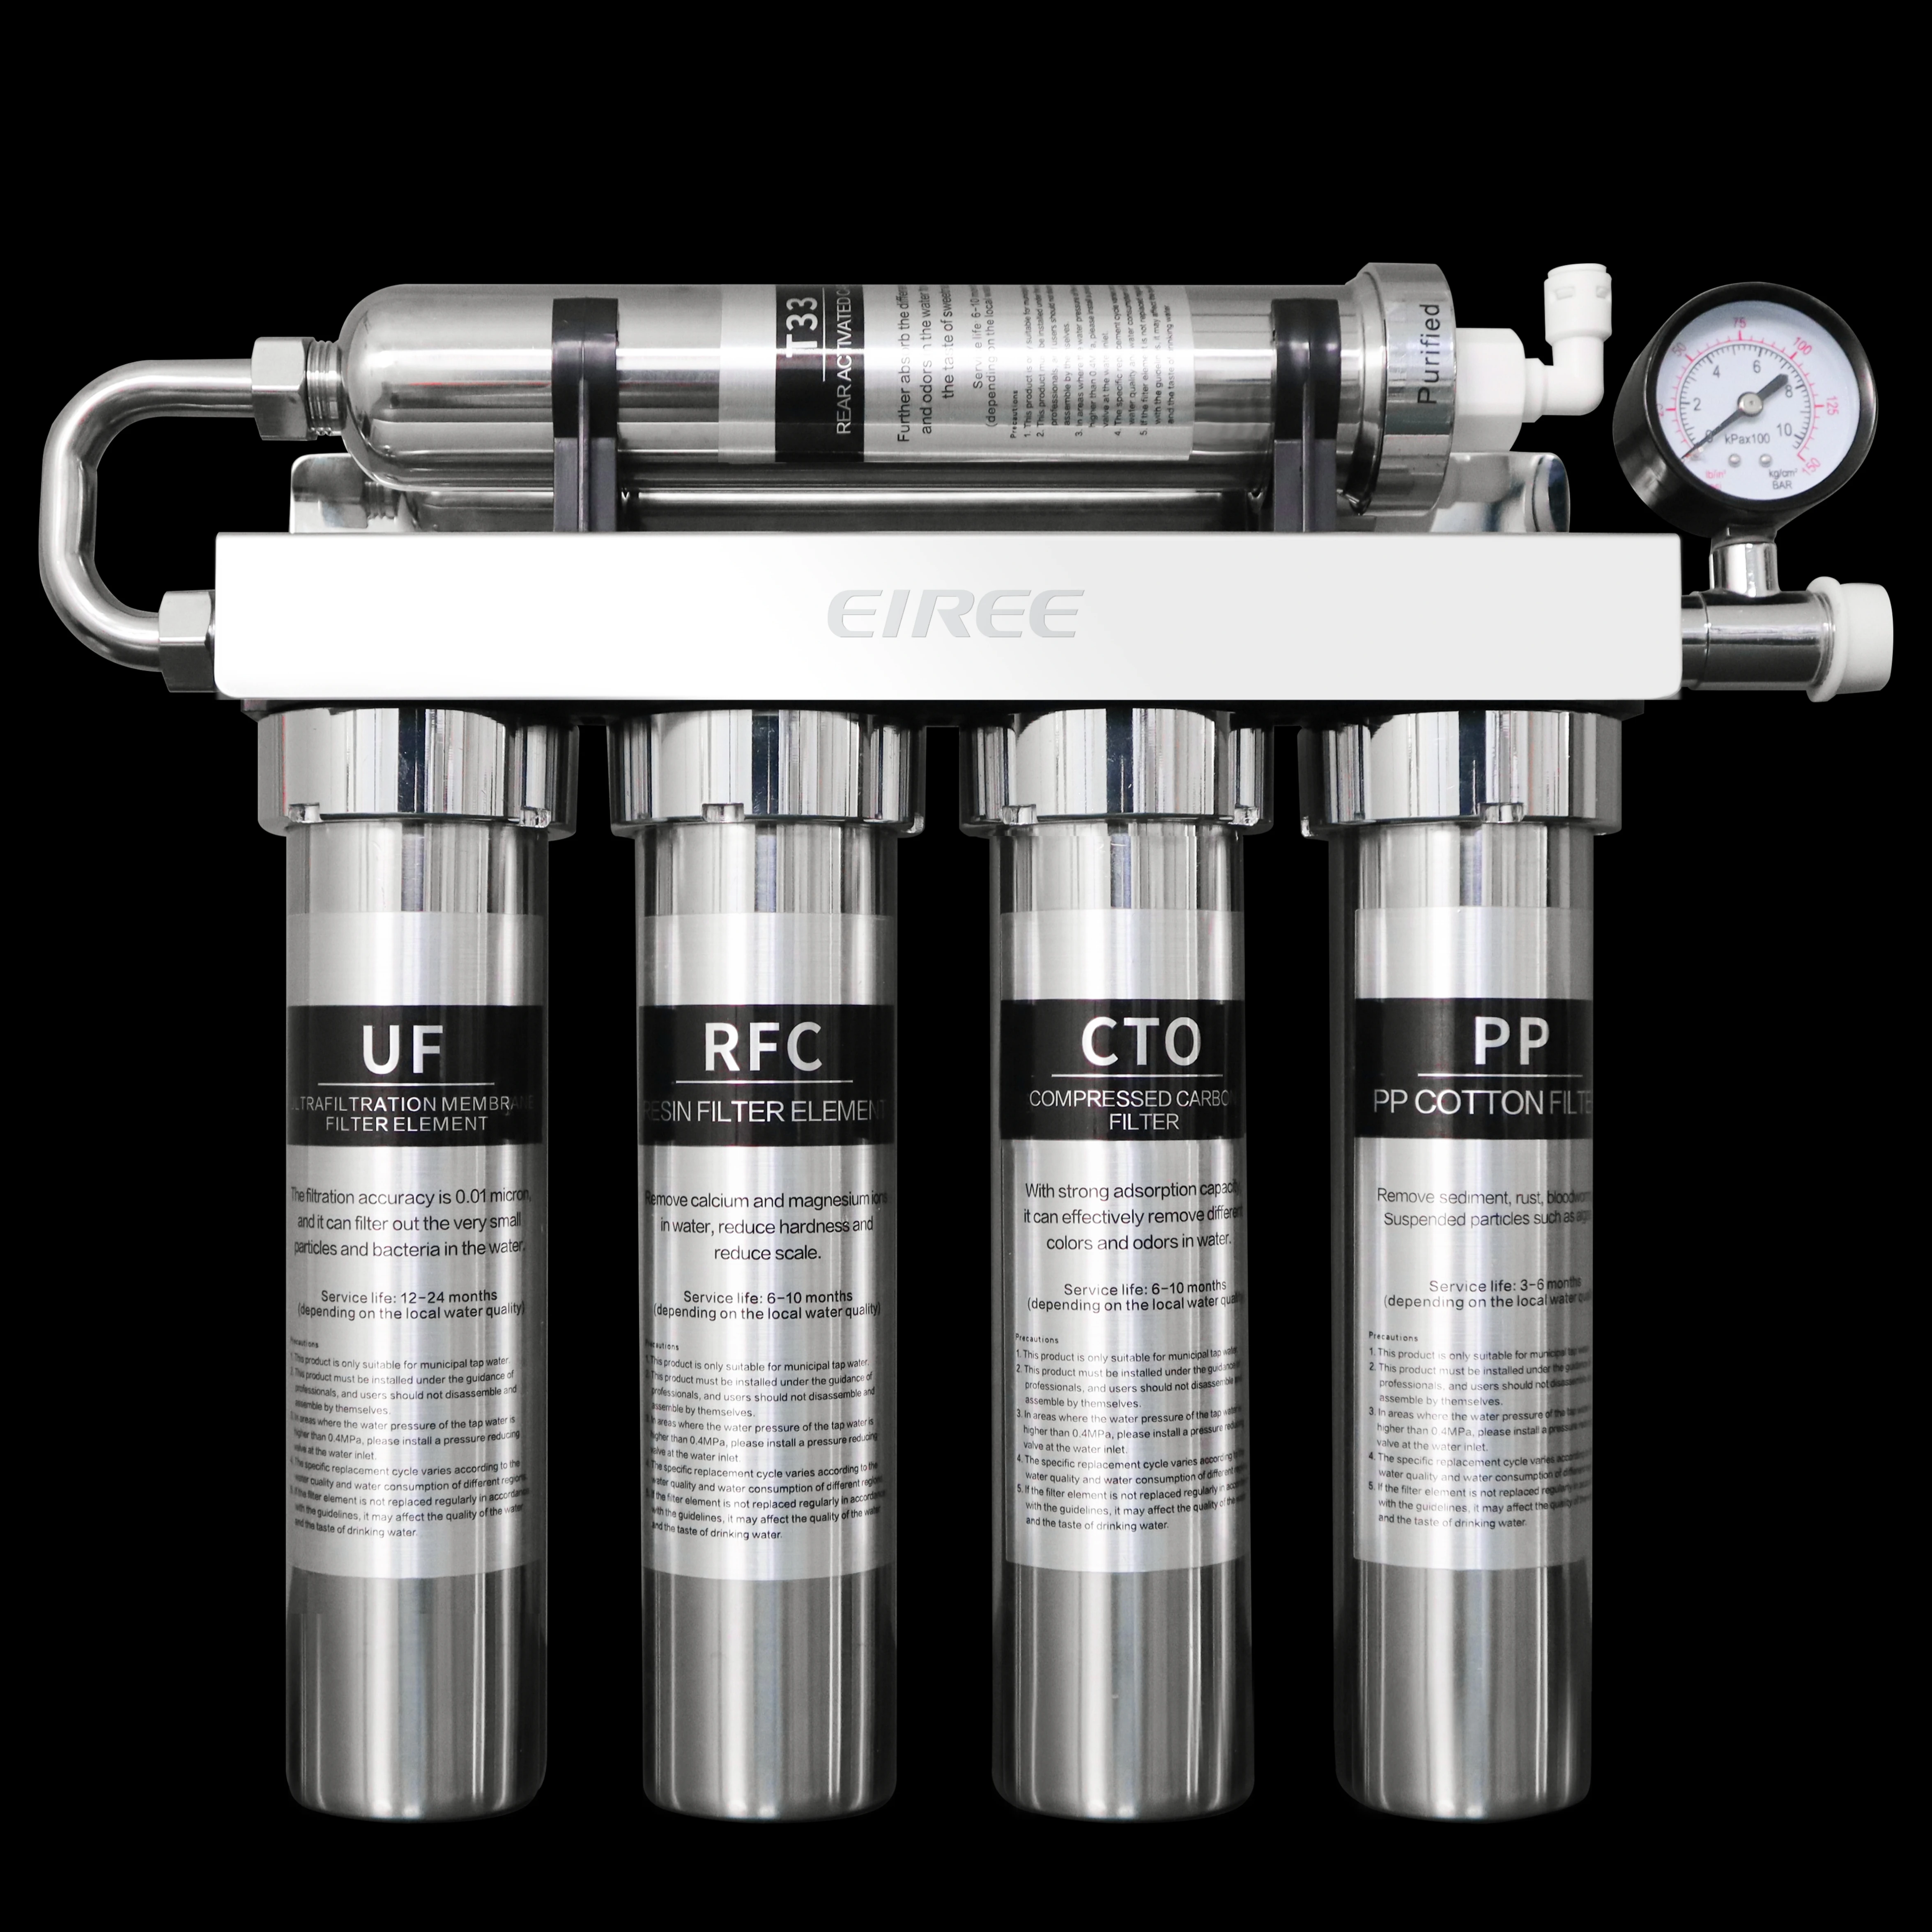 

hot sale EIREE filter housing 304 stainless steel tap 5 stage uf water purifier NO electricity water filter for household